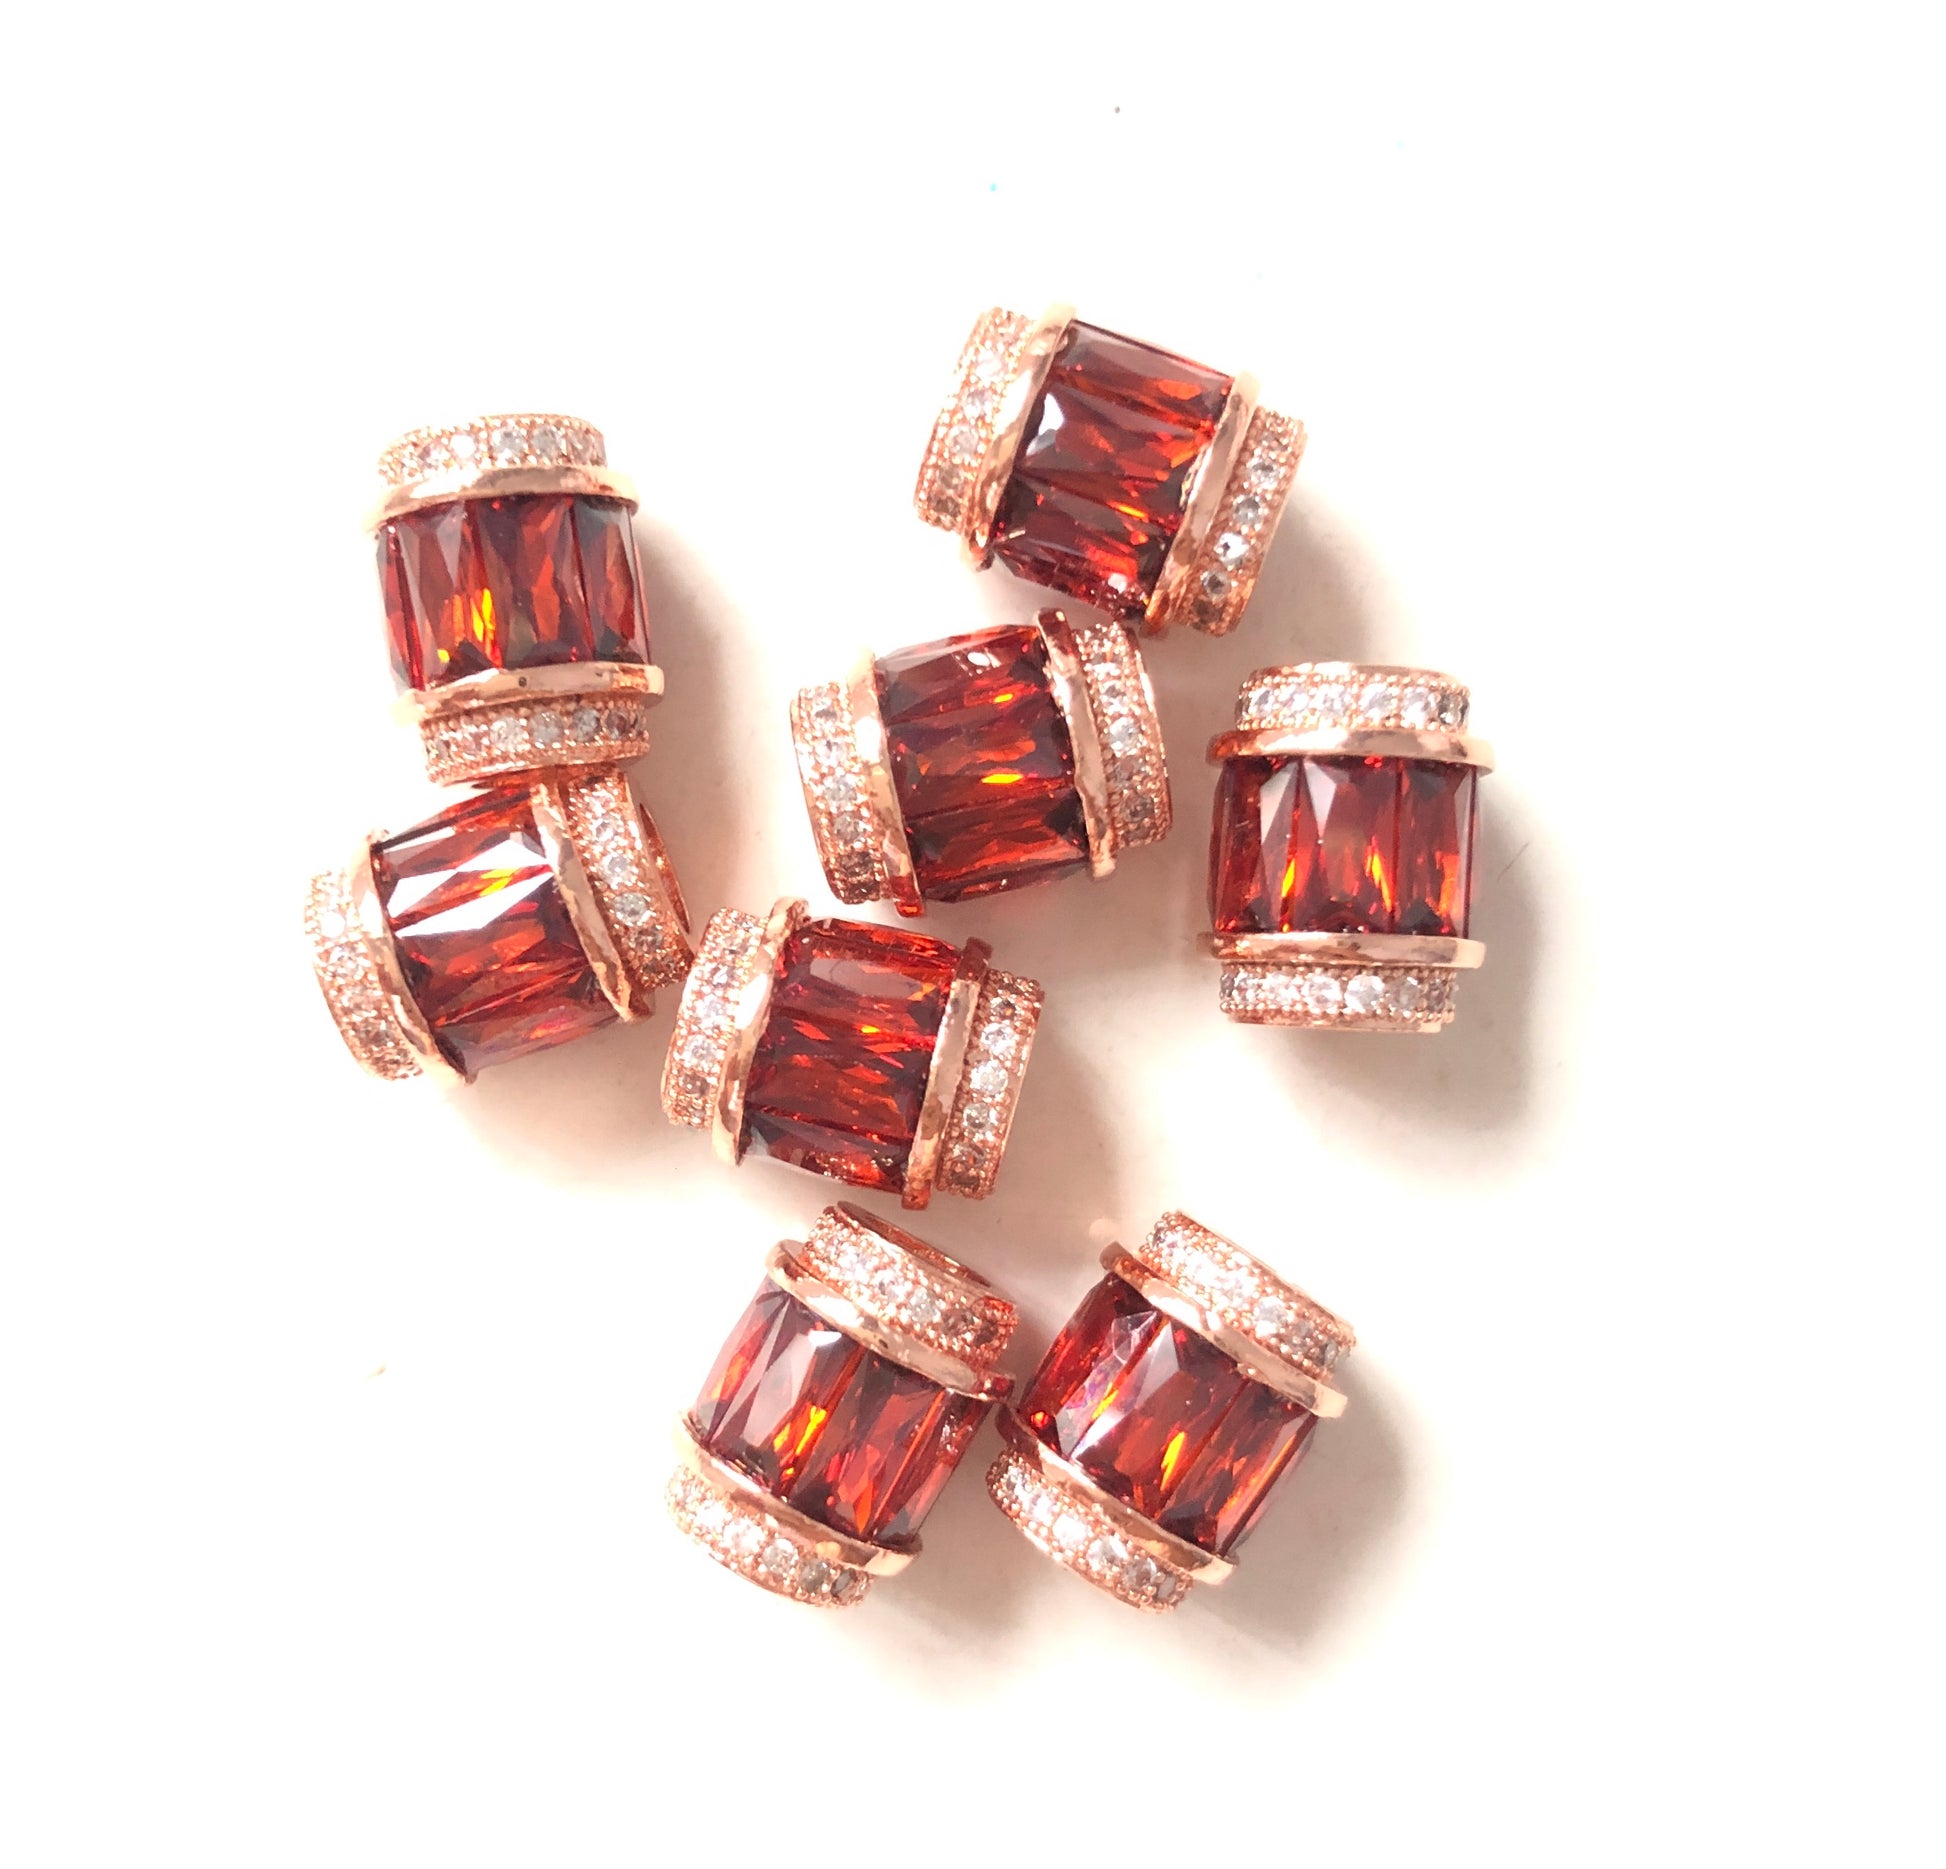 10pcs/lot 12*10mm Red CZ Paved Big Hole Spacers Rose Gold CZ Paved Spacers Big Hole Beads New Spacers Arrivals Charms Beads Beyond